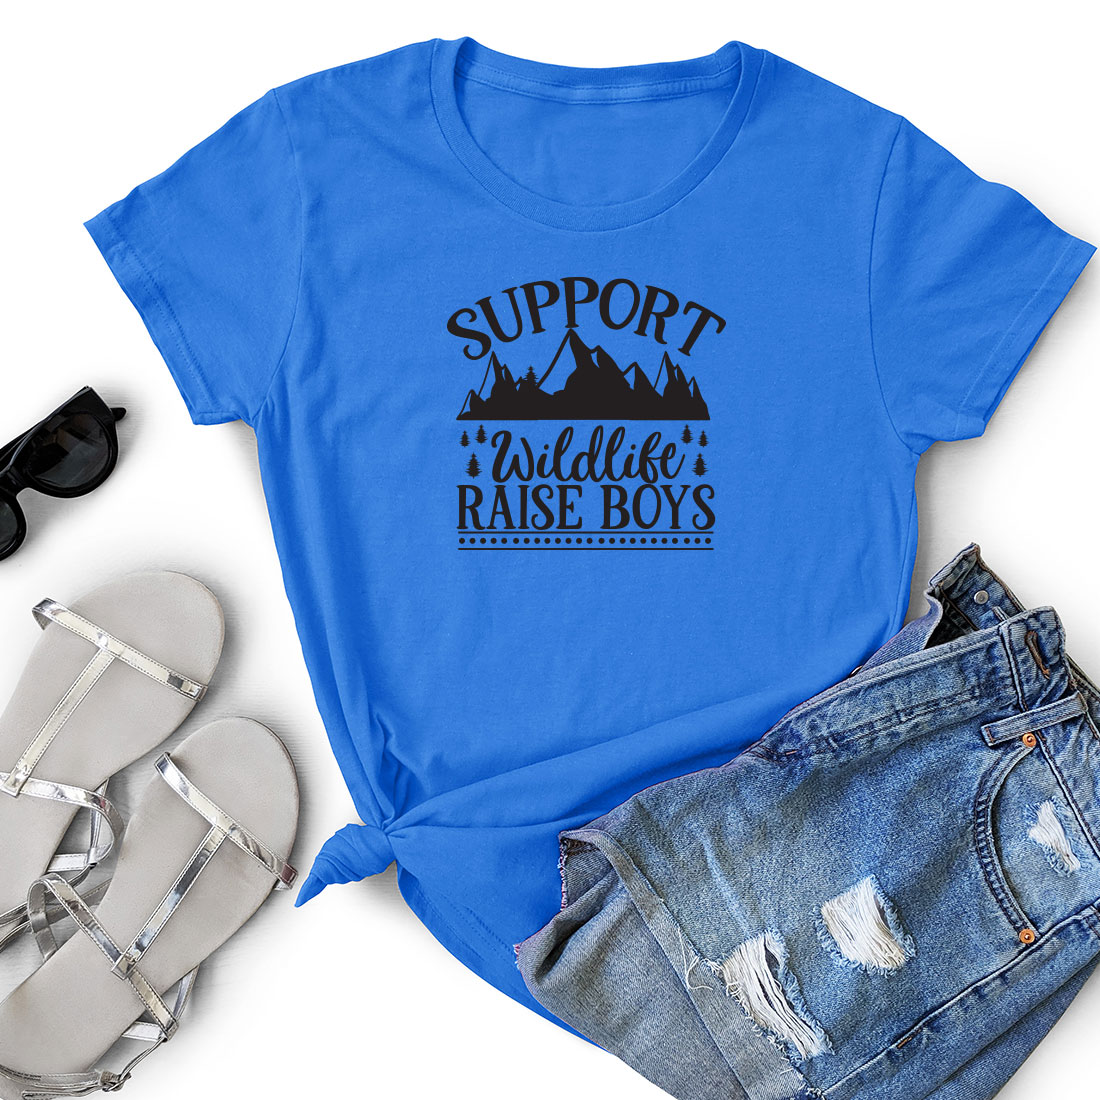 Blue t - shirt that says support wildlife raise boys next to a pair of.